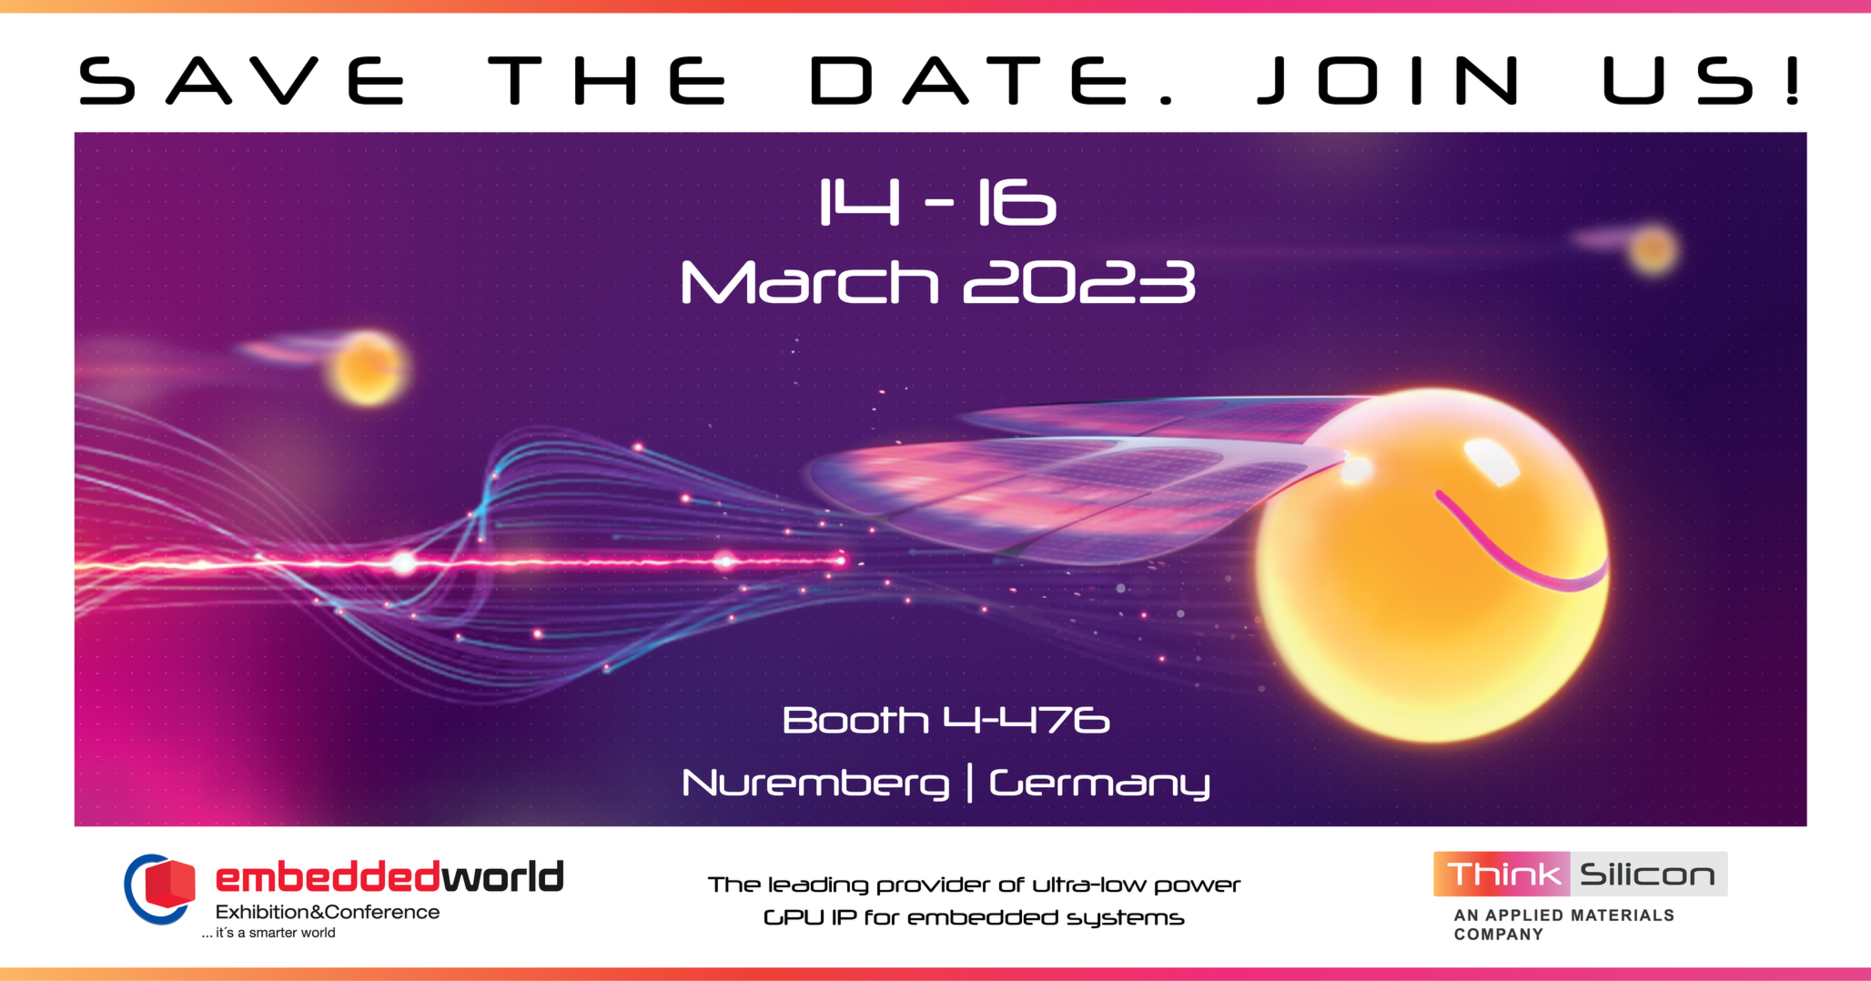 Visit us at Embedded World 2023 | Hall 4, Stand 4 - 476